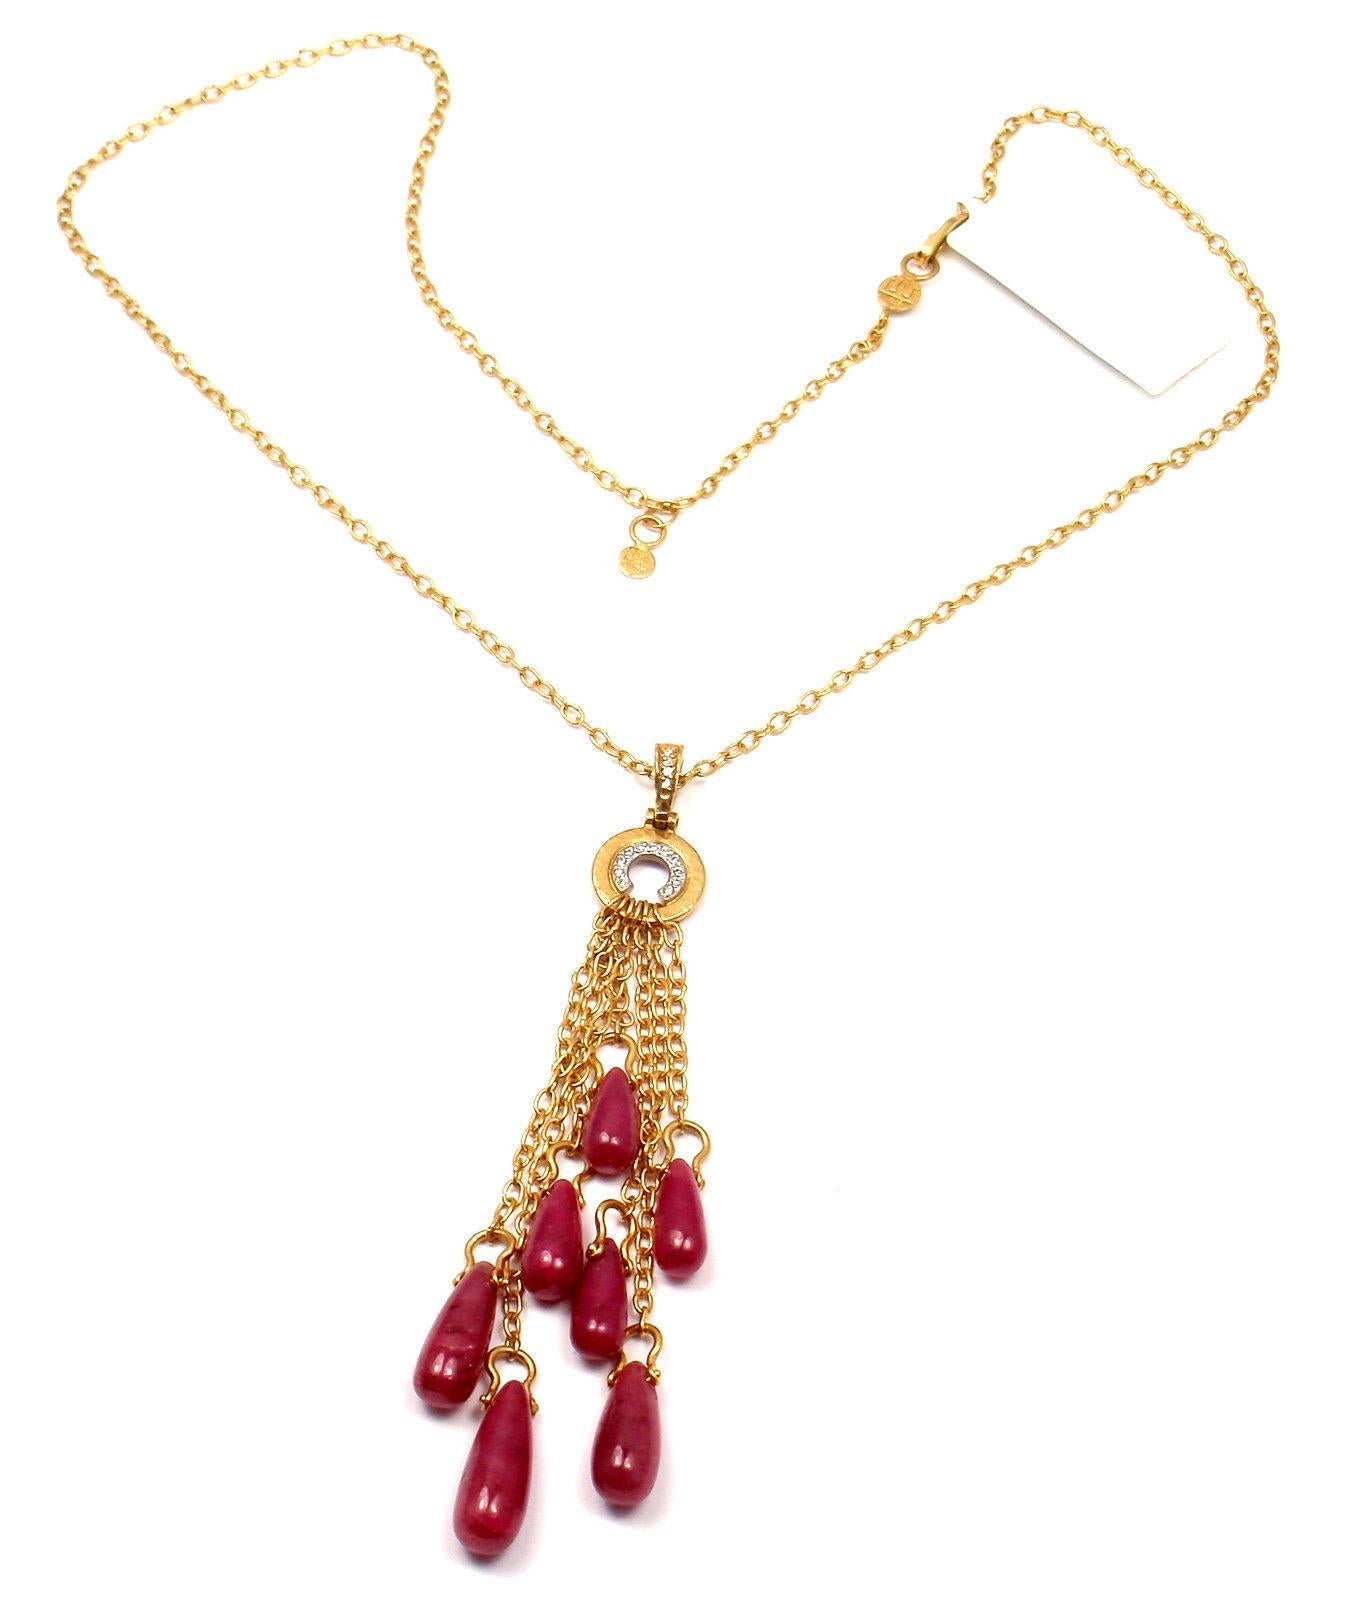 This striking 24k Yellow Gold One of a Kind necklace comes from the legendary GURHAN. 
With 15 round small diamonds
5 rubies
This necklace comes with Gurhan pouch and a tag.
Retail Price: $9,250

Measurements: 
Length: 18